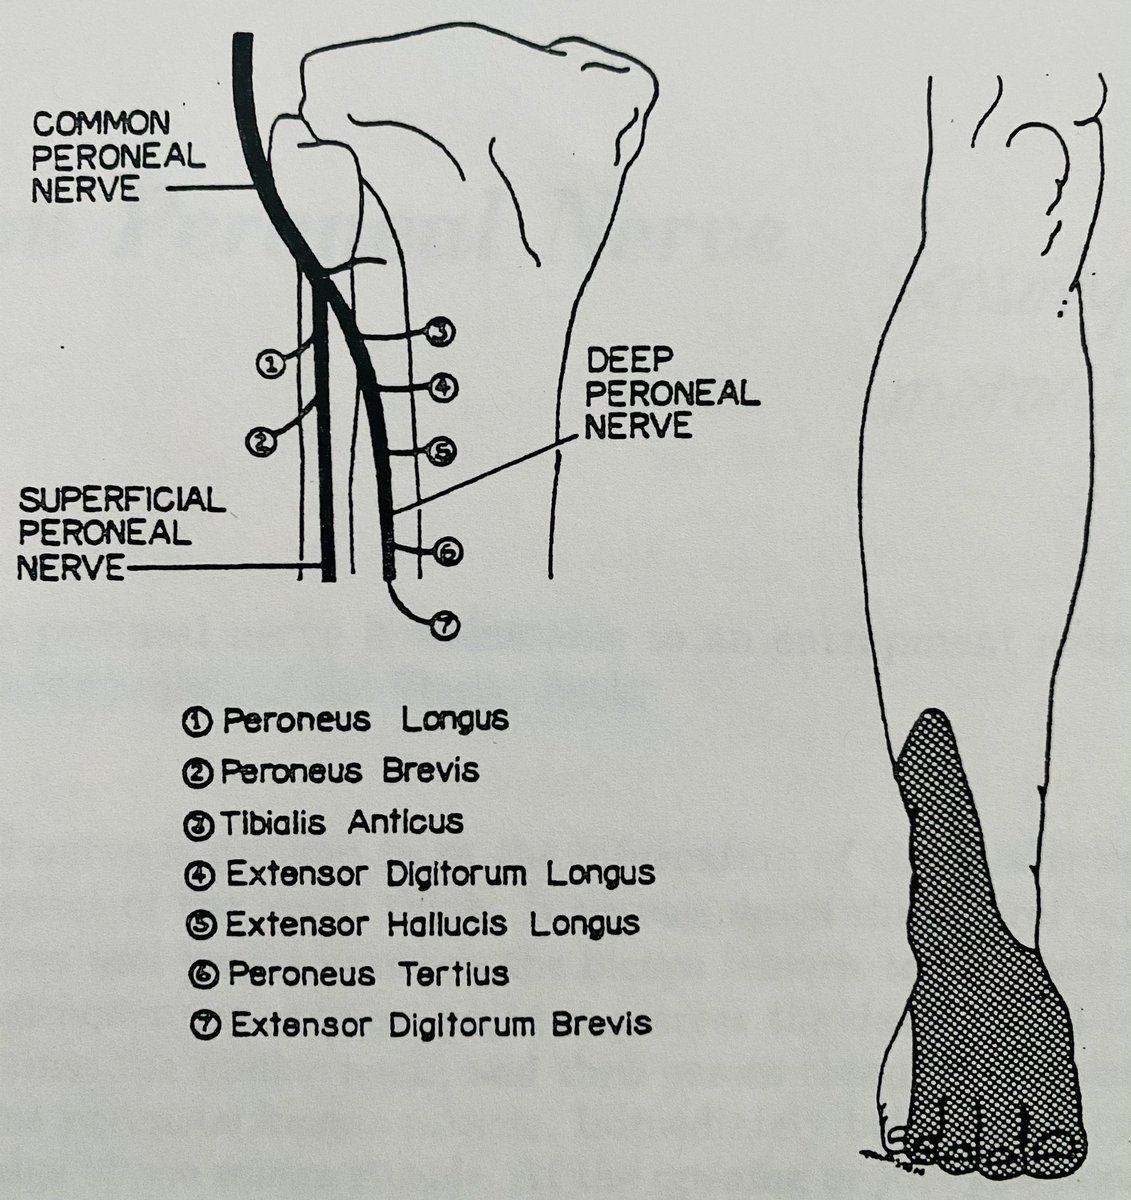 4/ Common (root) Peroneal Nerve supplies:• ankle dorsiflexors muscles• foot/ankle eversion muscles• sensation along lateral > anterior aspects of knee, ankle, & foot.